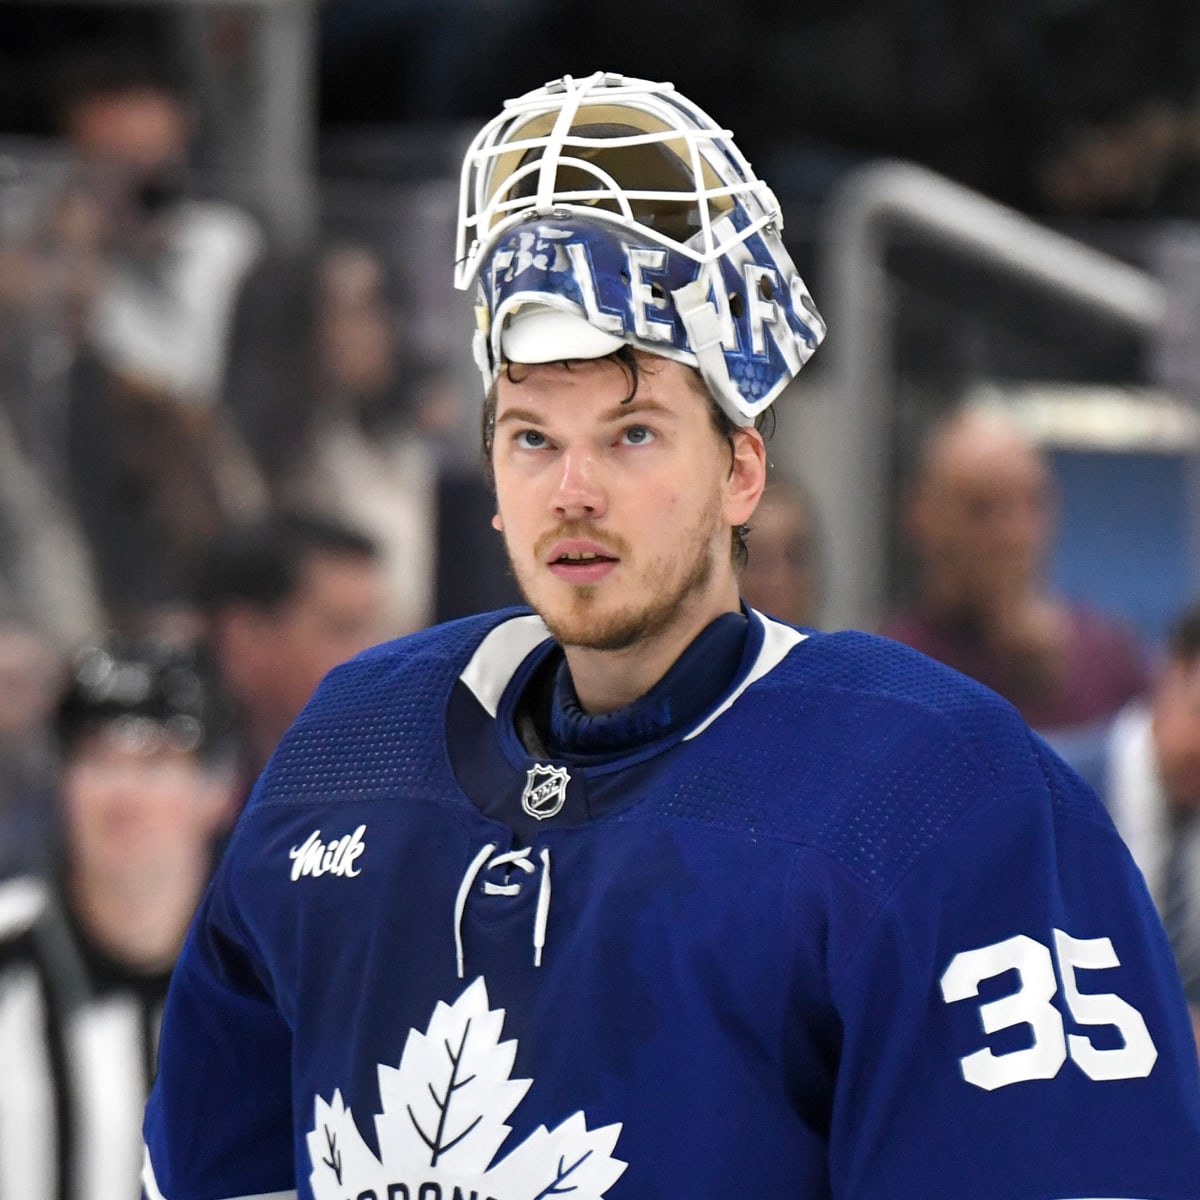 Meet Ilya Samsonov, the quirky, bubbly new Maple Leafs goalie with